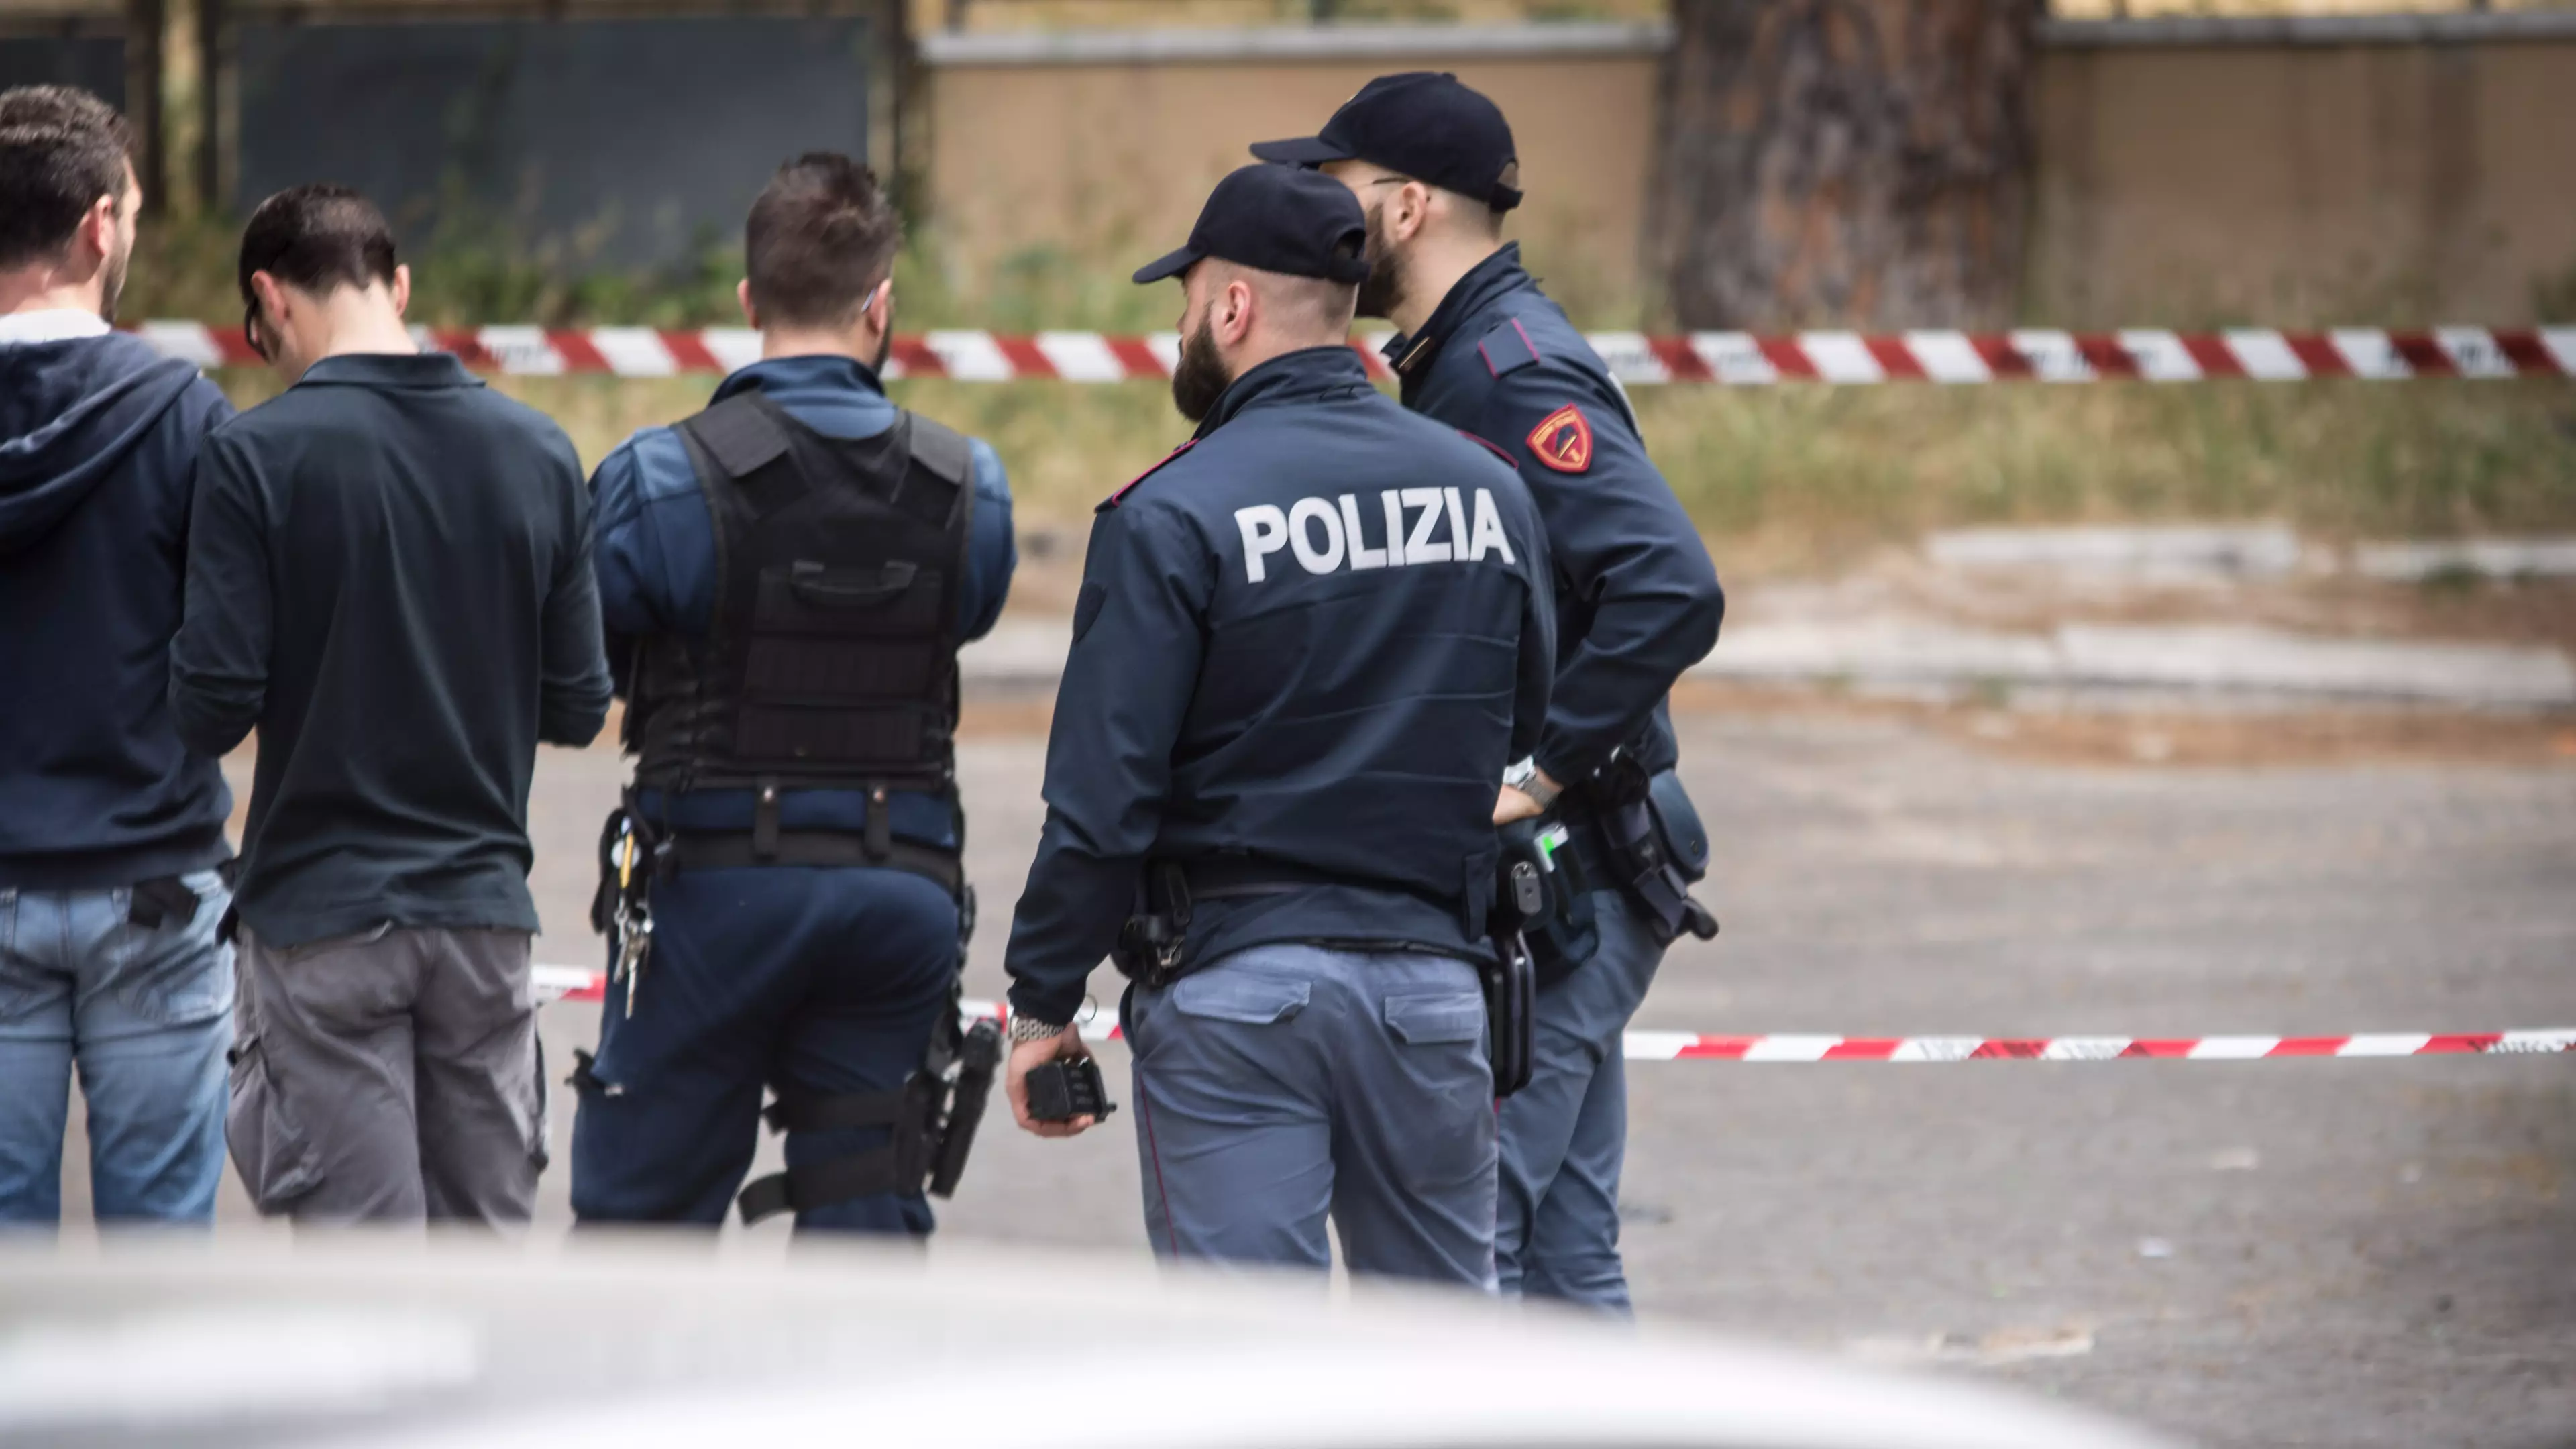 Bomb Suspected As Police Investigate Explosions In Rome